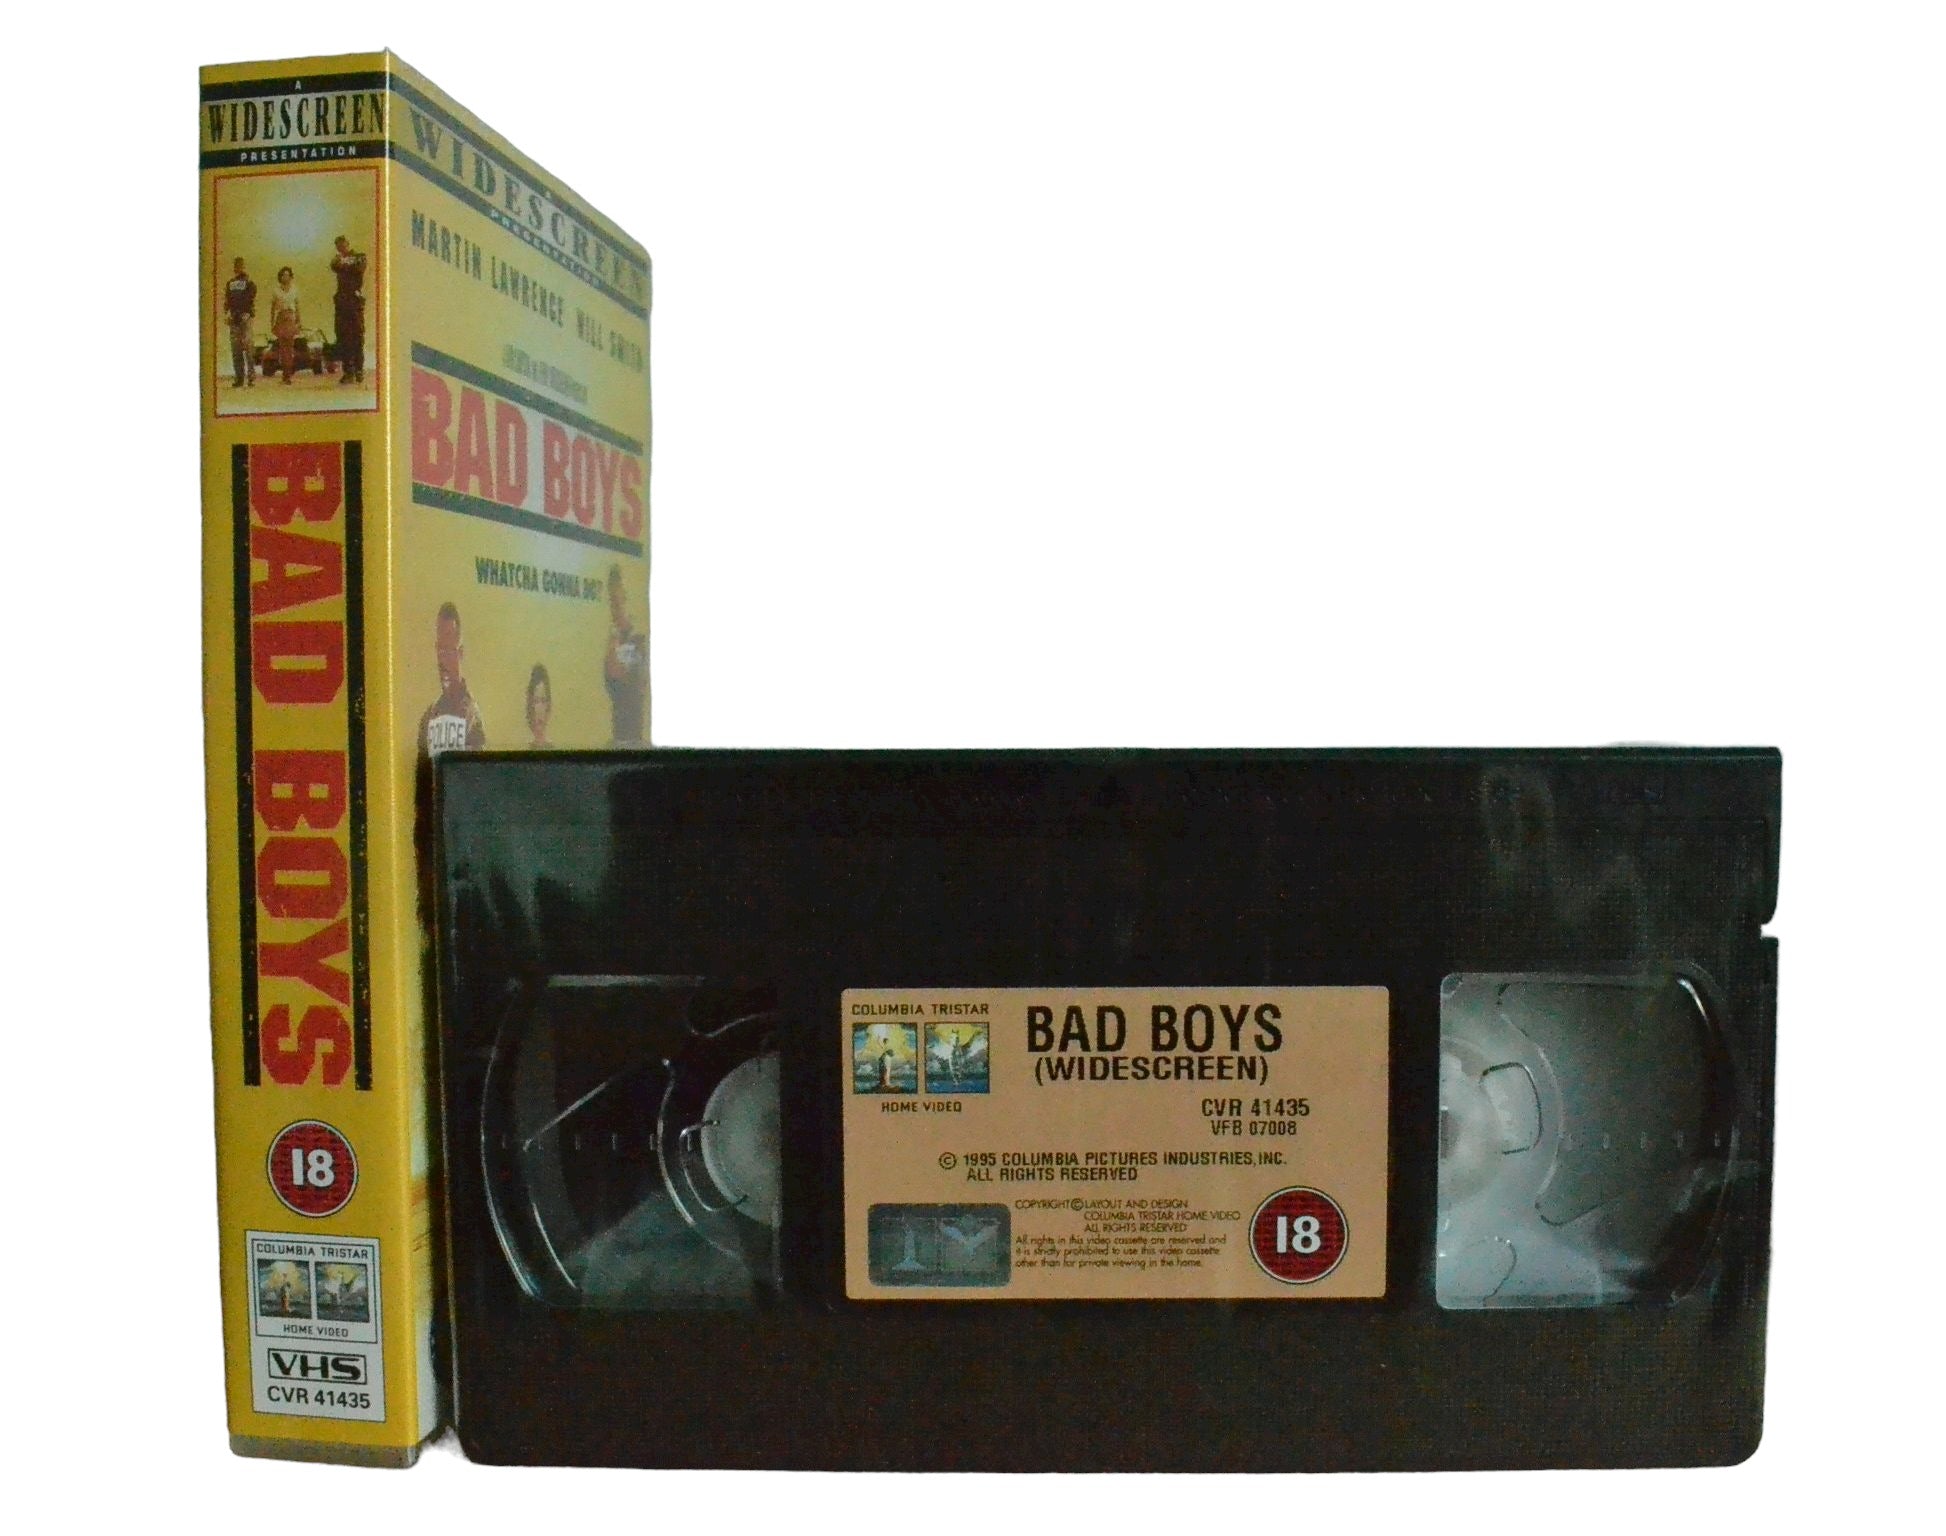 Bad Boys (Widescreen) - Will Smith - Columbia Tristar Home Video - Brand New Sealed - Pal VHS-